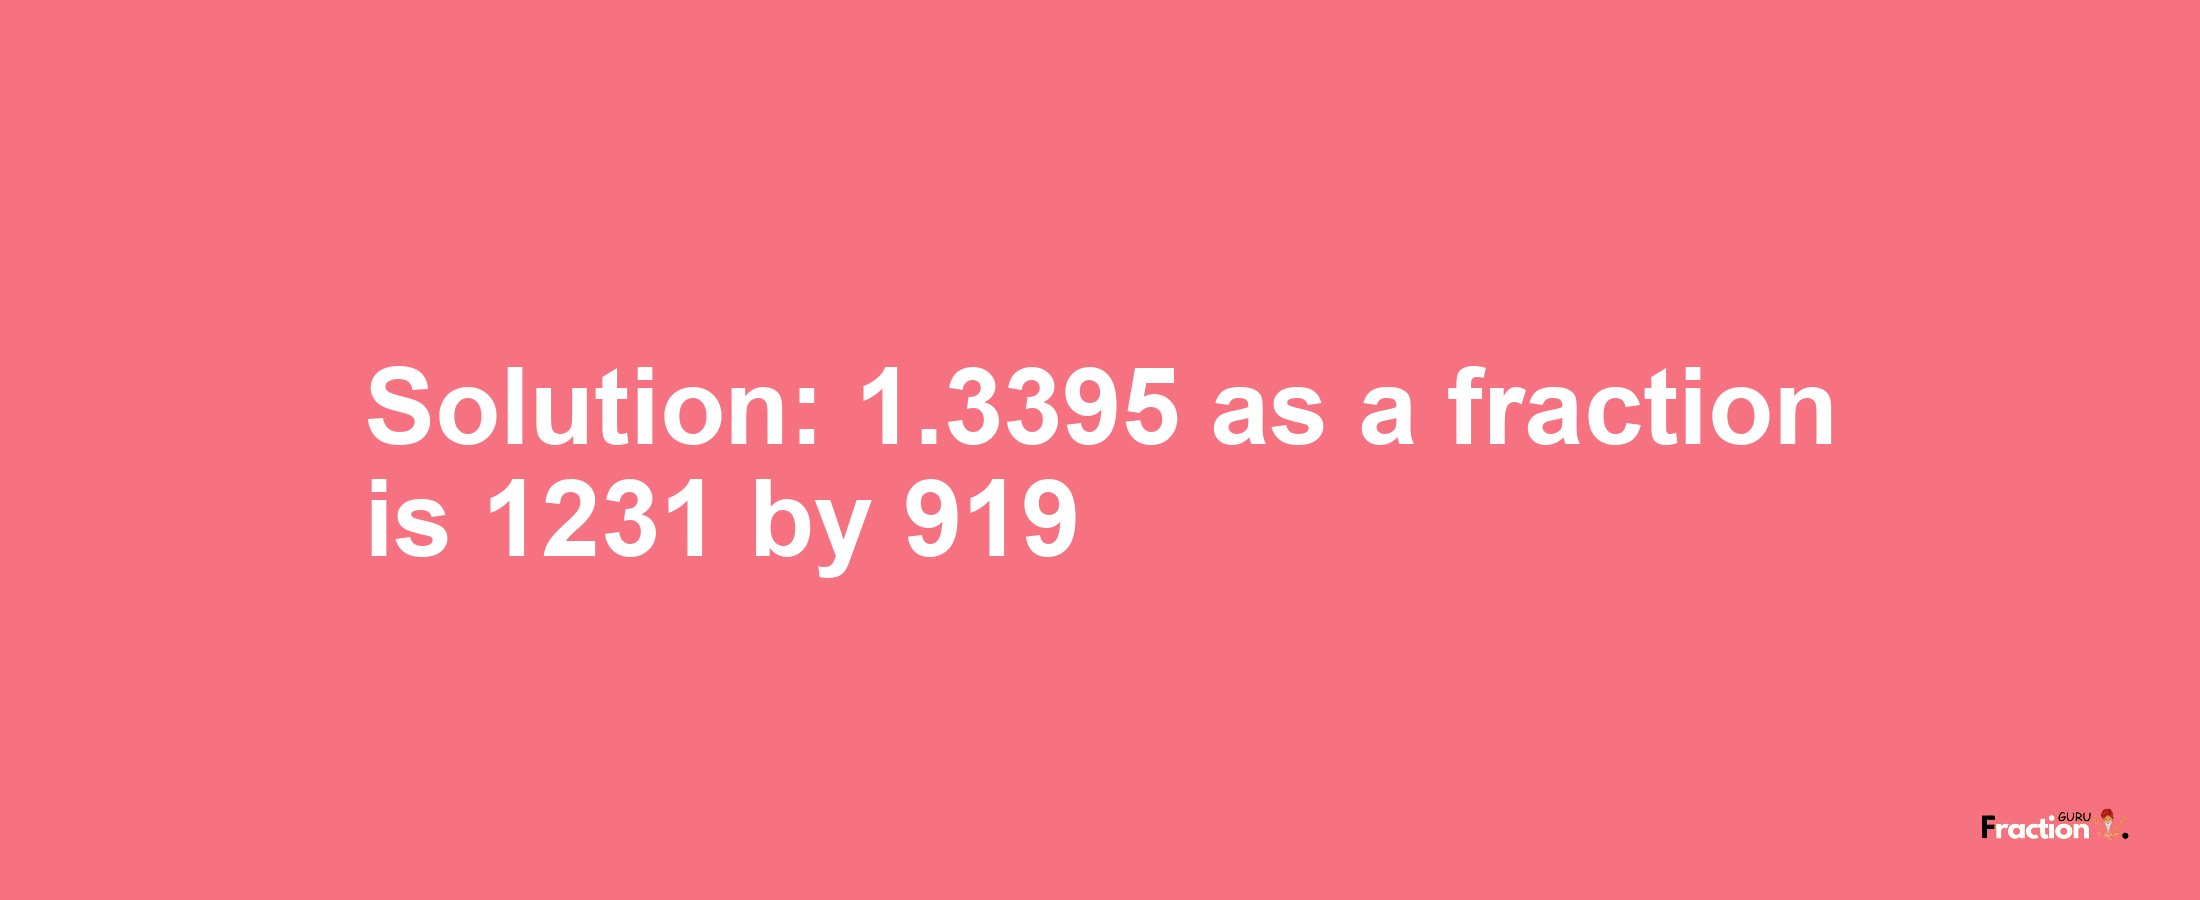 Solution:1.3395 as a fraction is 1231/919